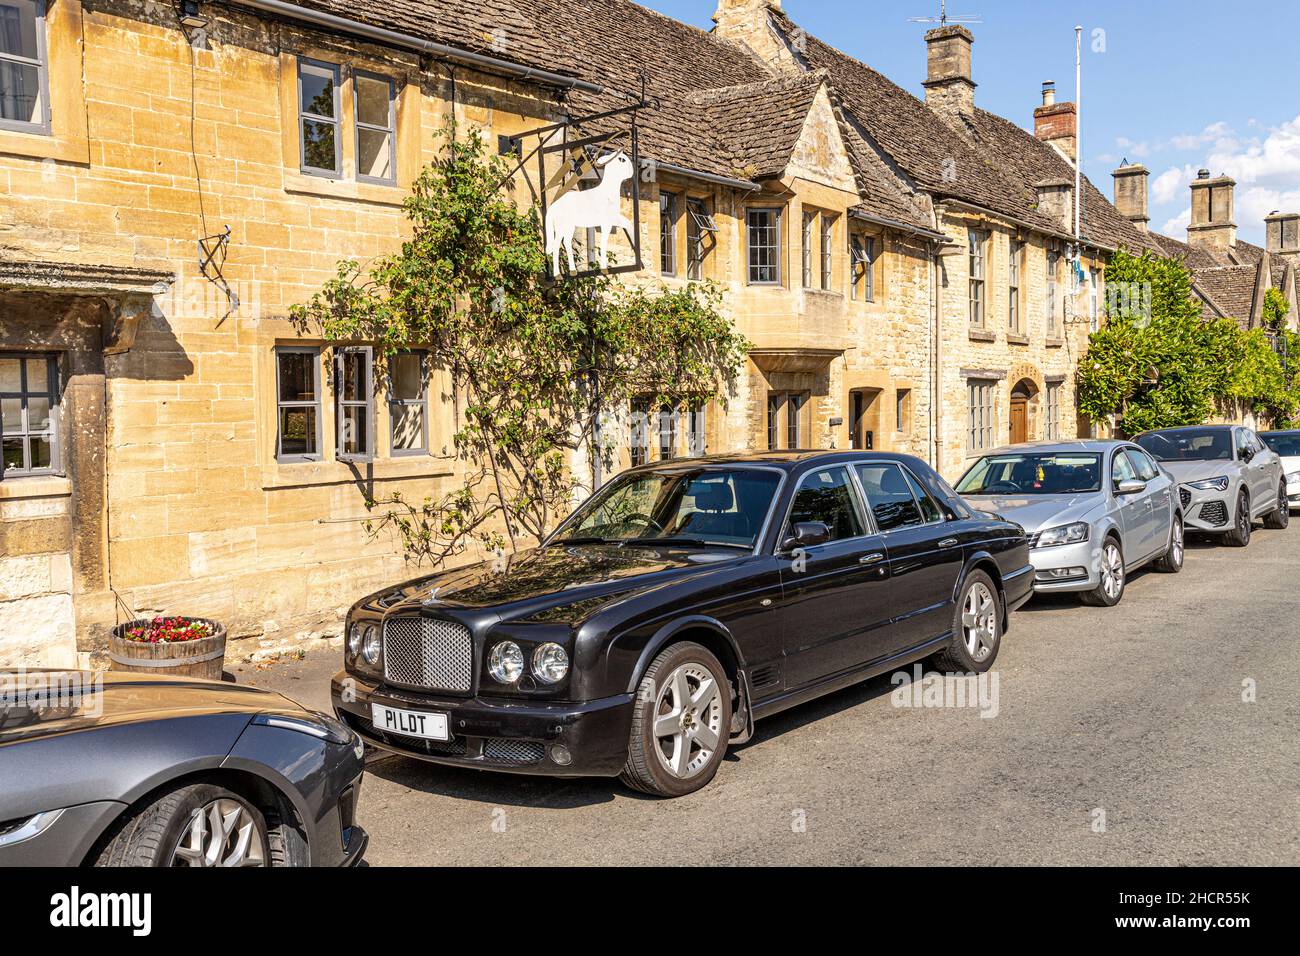 A Bentley with a personalised number plate P1LDT parked outside the Lamb Inn Hotel in Sheep Street in the Cotswold town of Burford, Oxfordshire UK Stock Photo